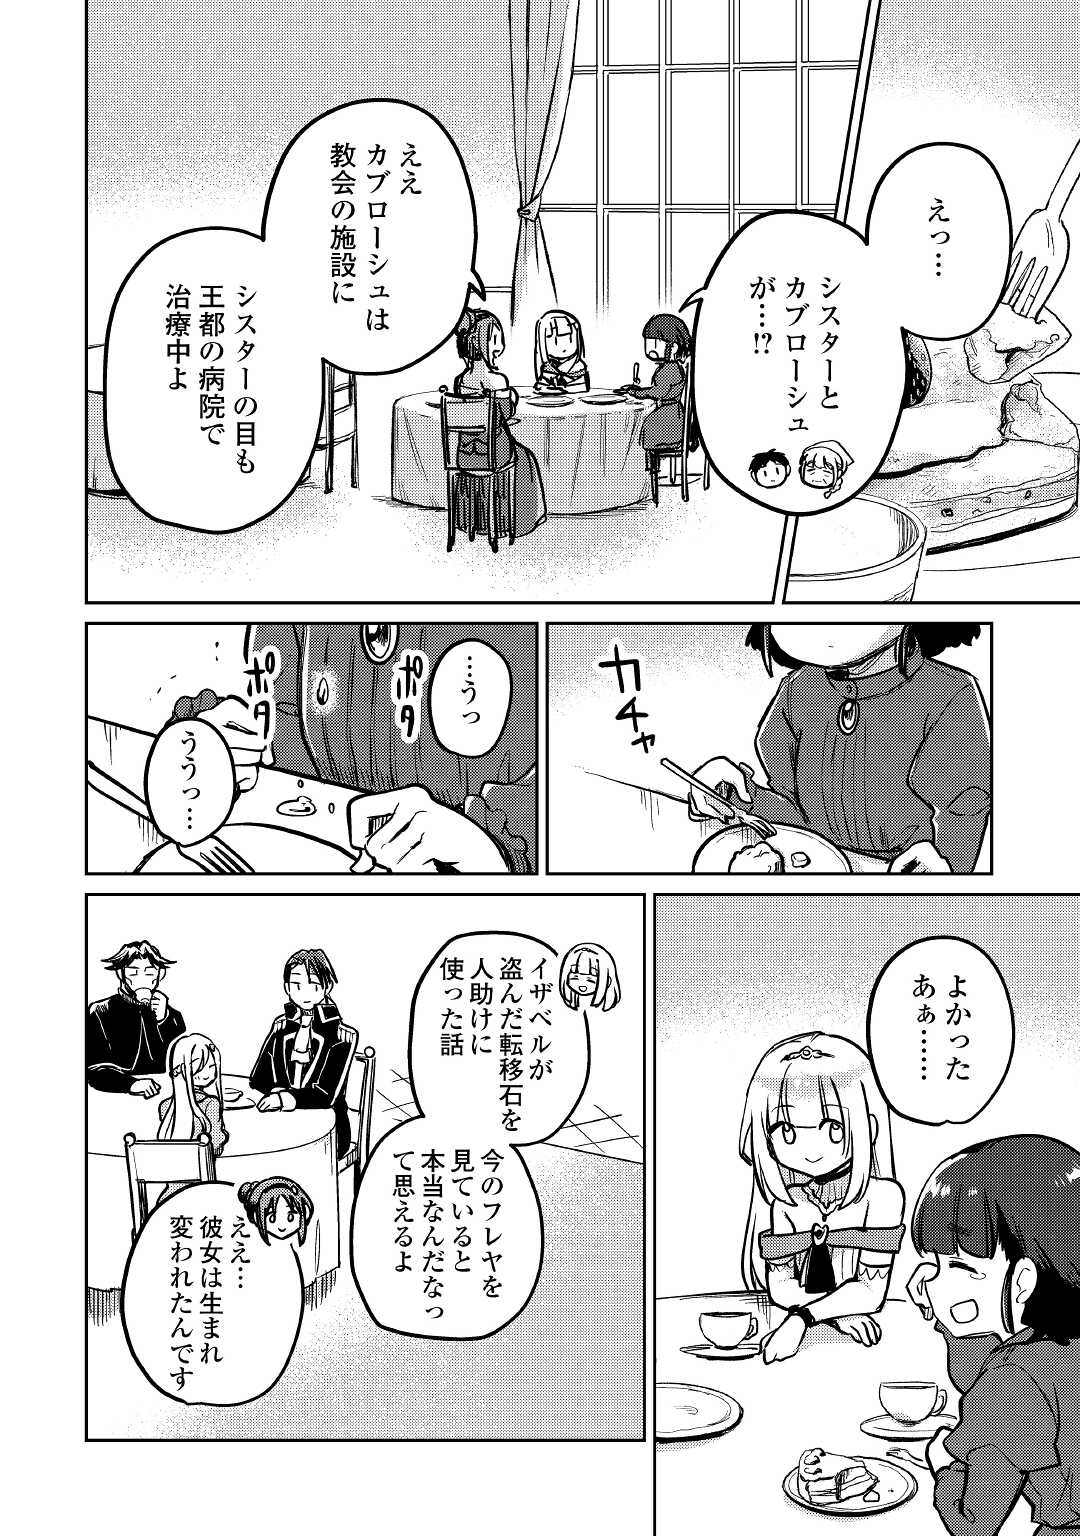 The Former Structural Researcher’s Story of Otherworldly Adventure 第42話 - Page 16